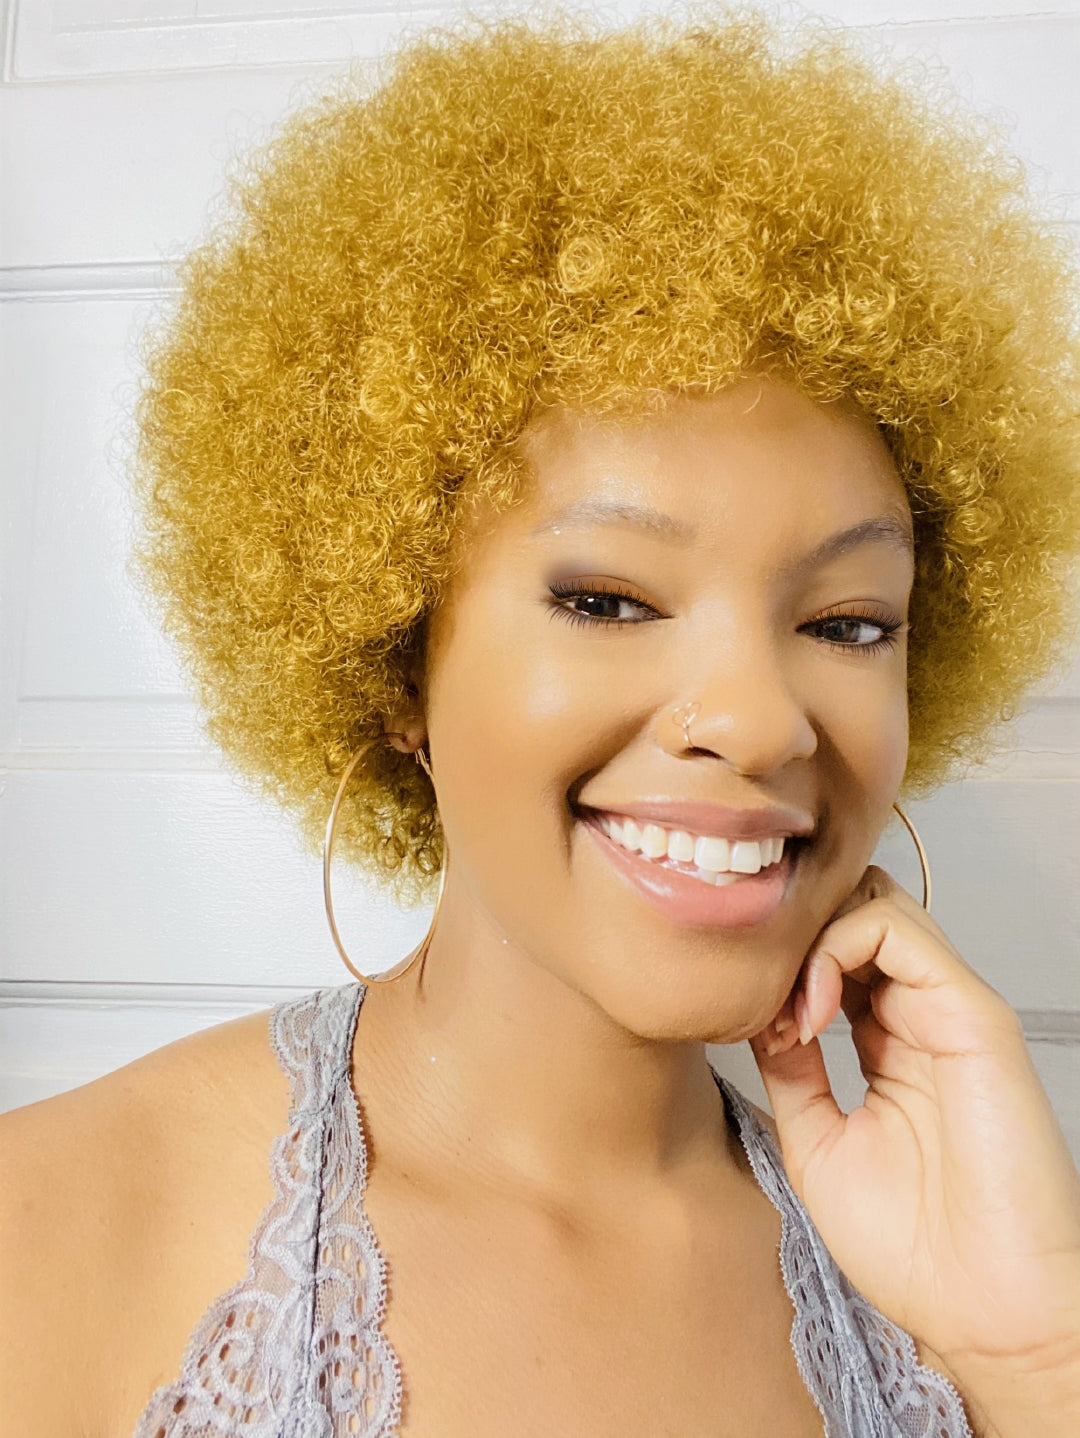 MEDIUM AFRO - Women - Wigs - Full Wig by ANYTIME COLLECTION 